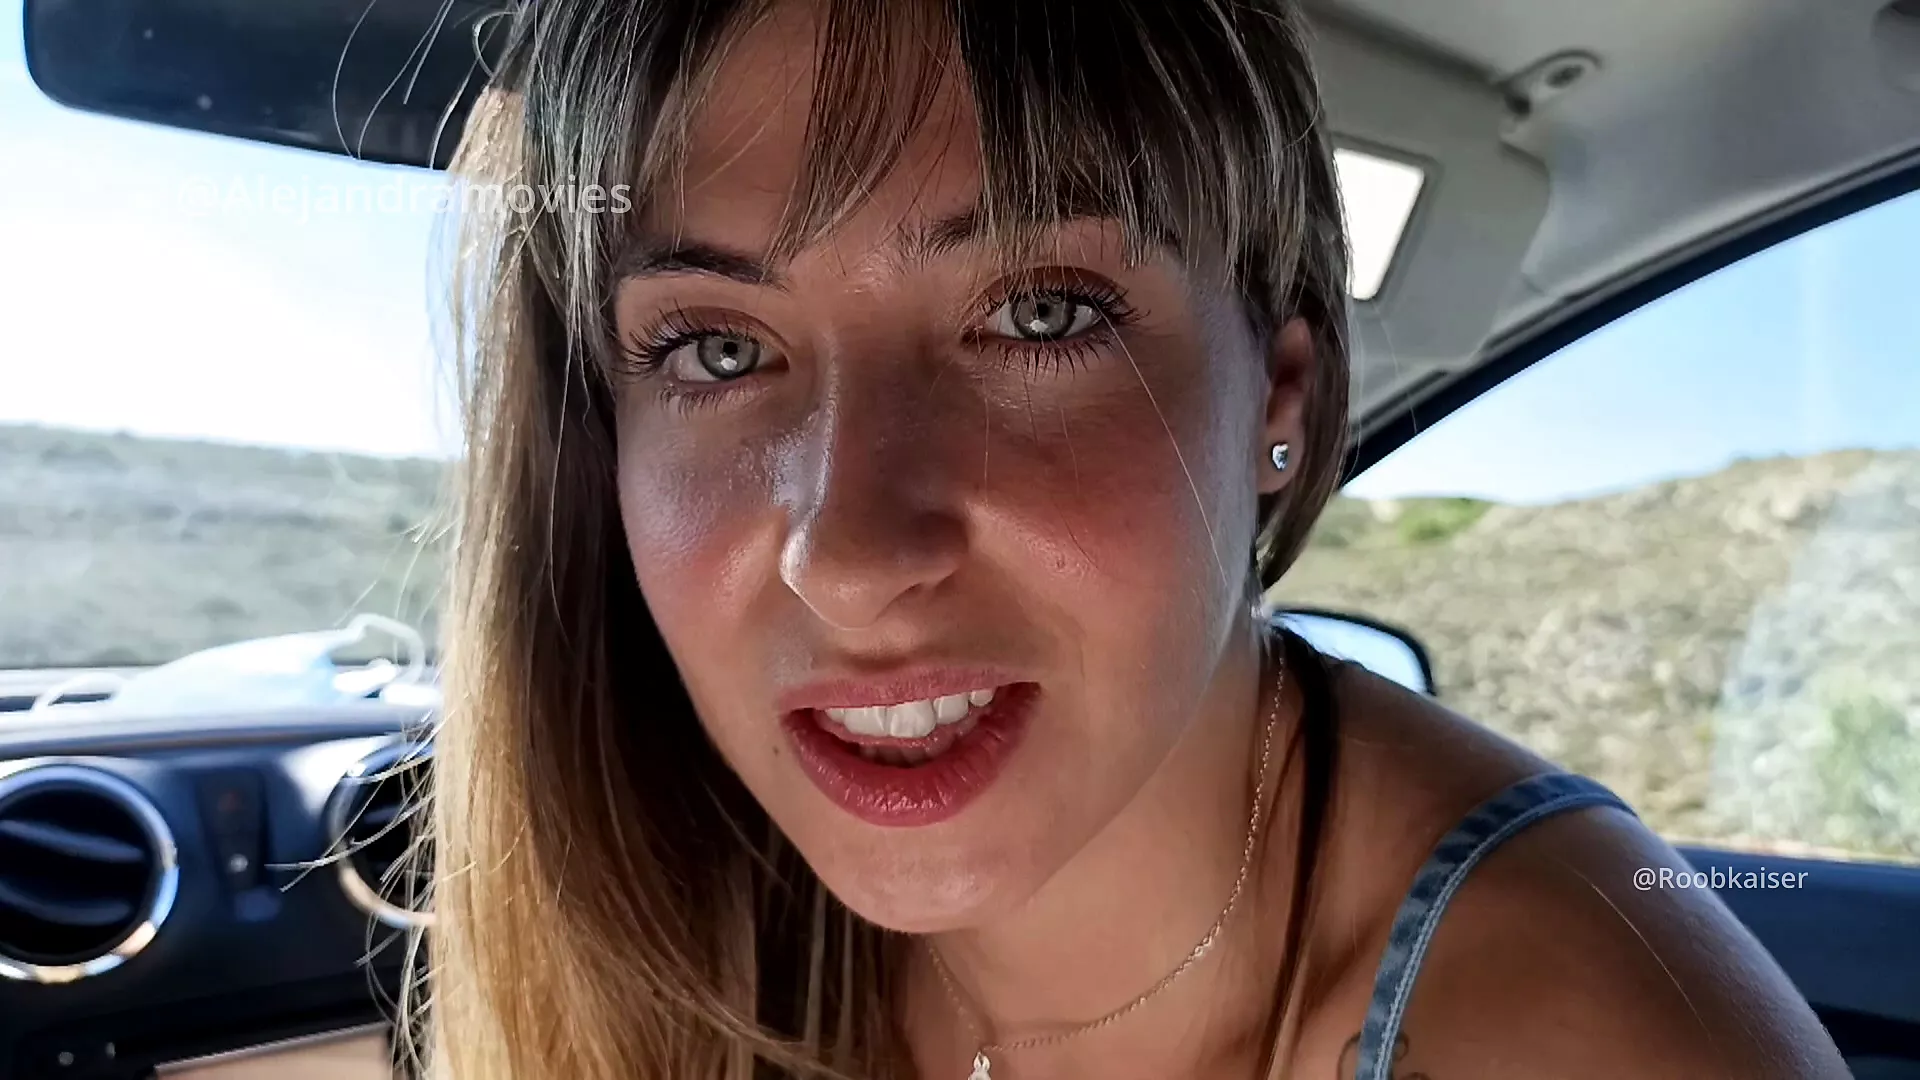 Oral sex with a stranger in the car, I suck his cock in the car in public image